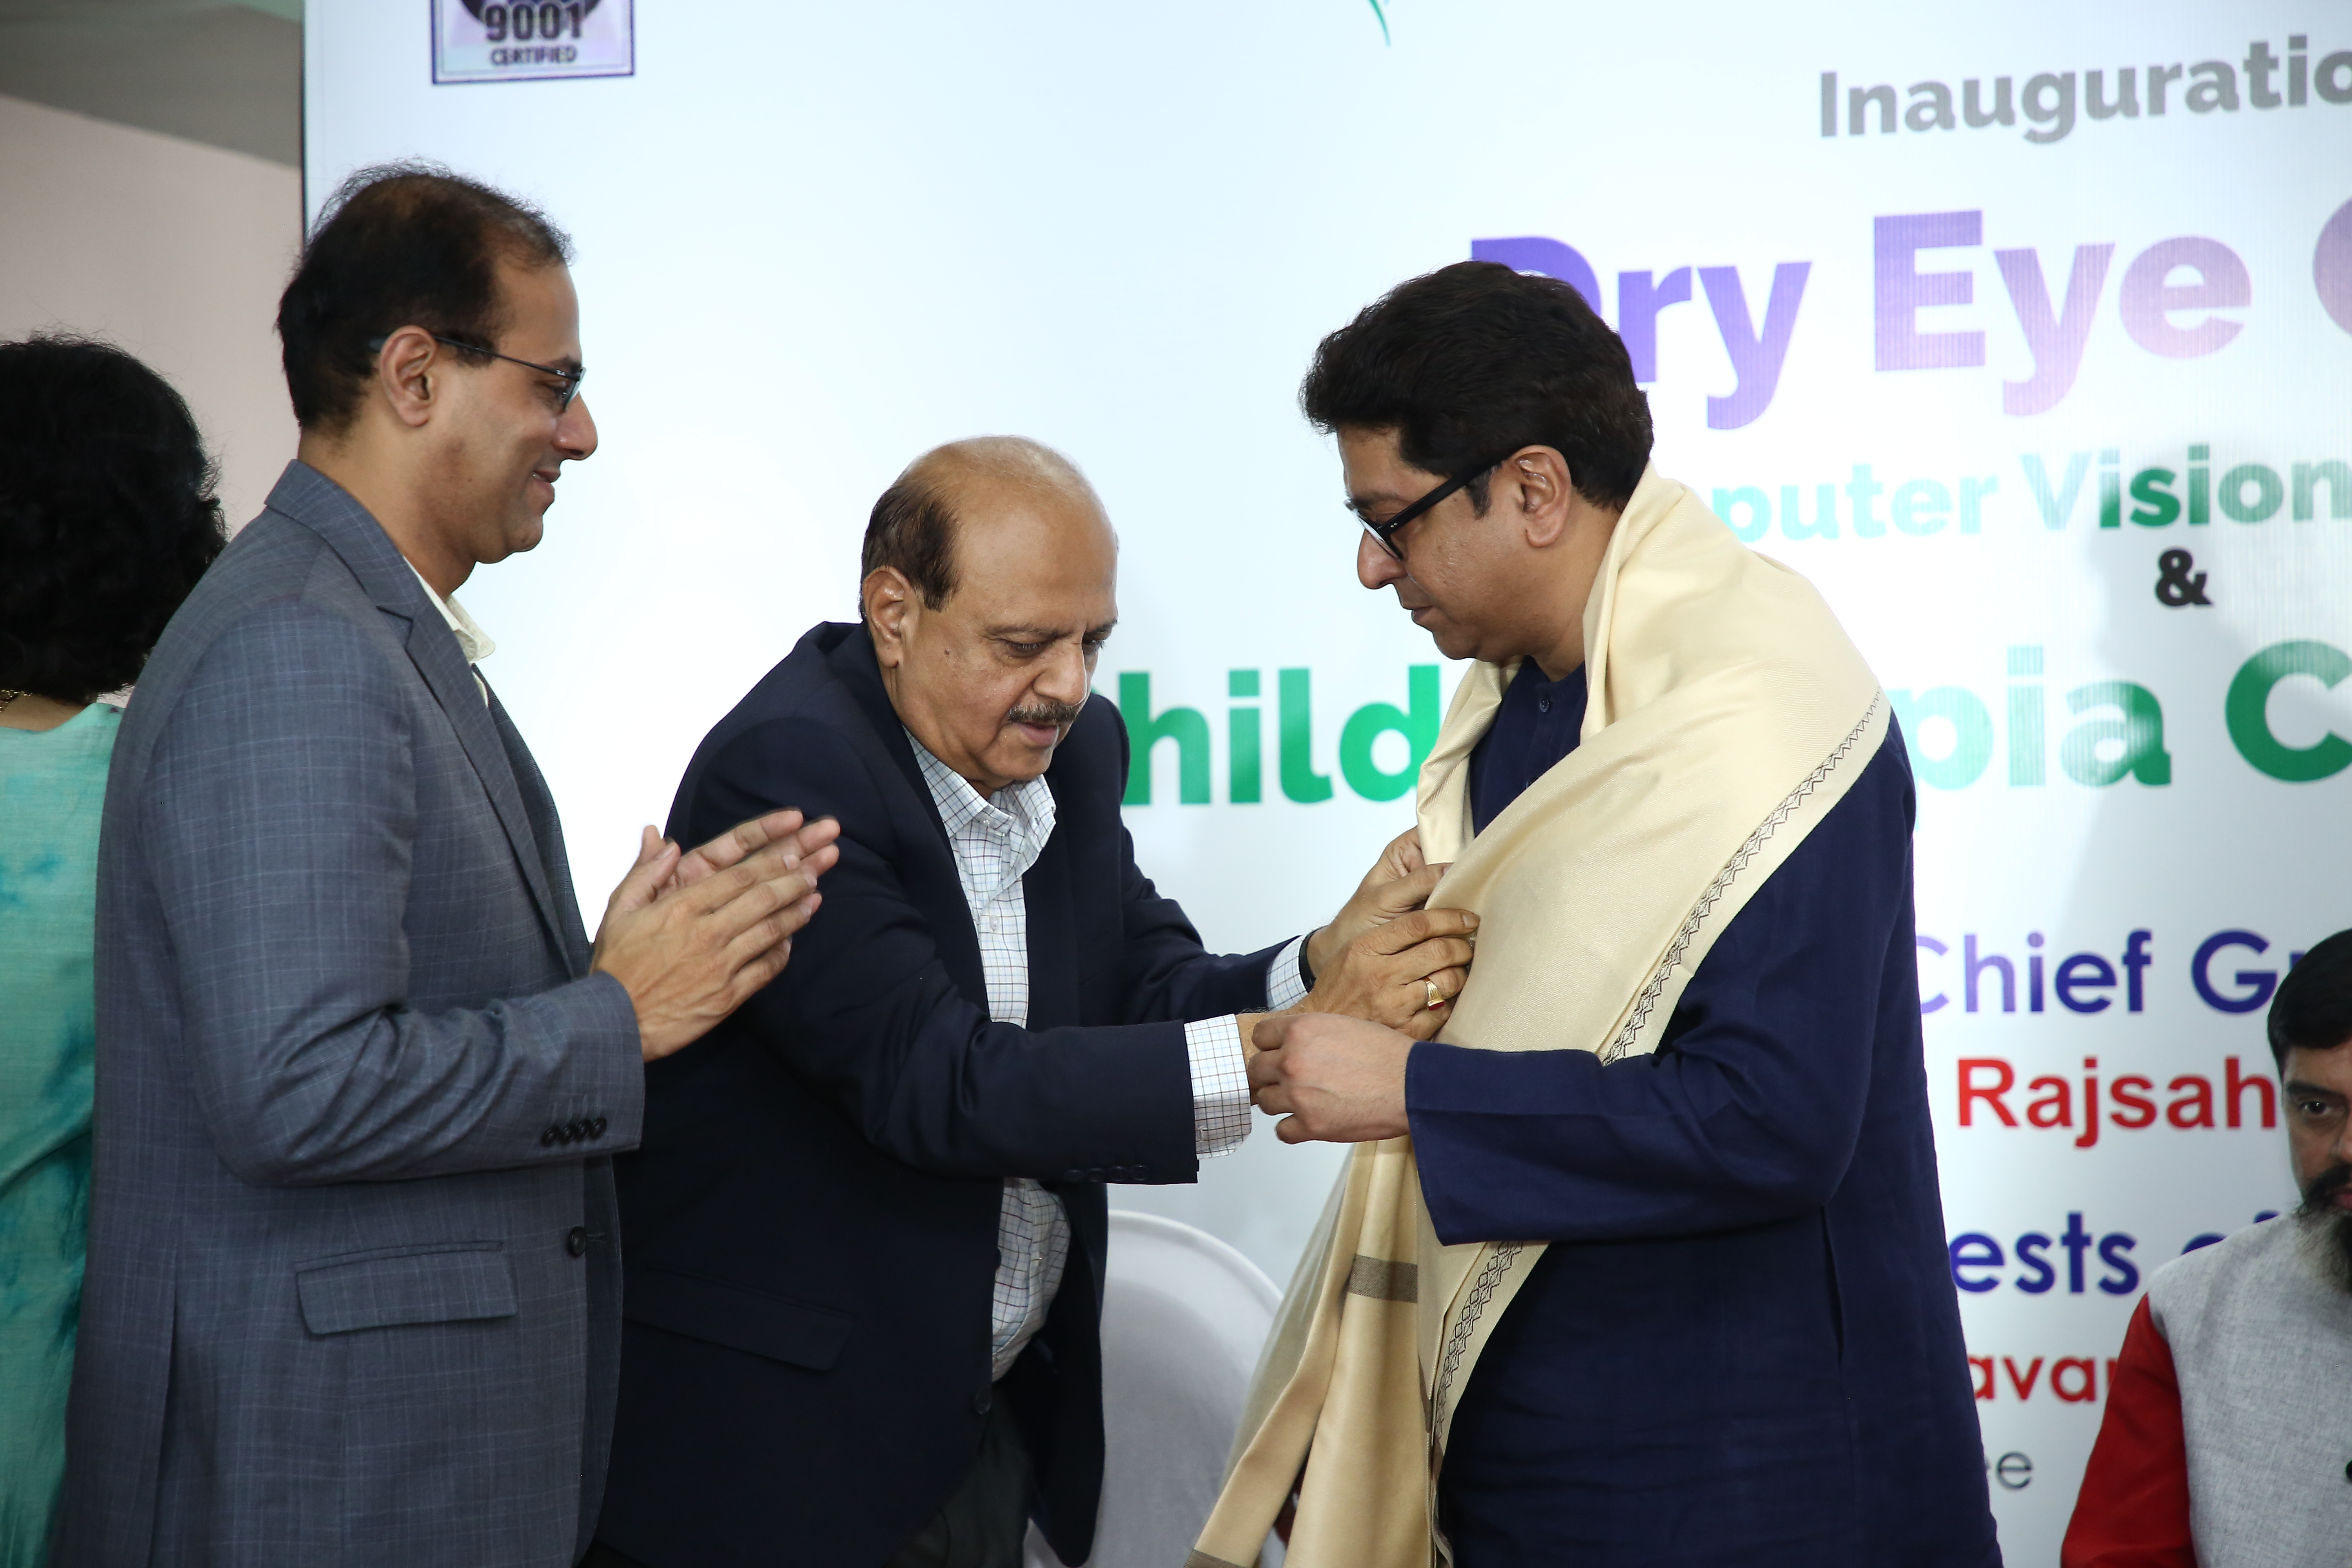 inauguration of our dry eye & child myopia control clinic-2